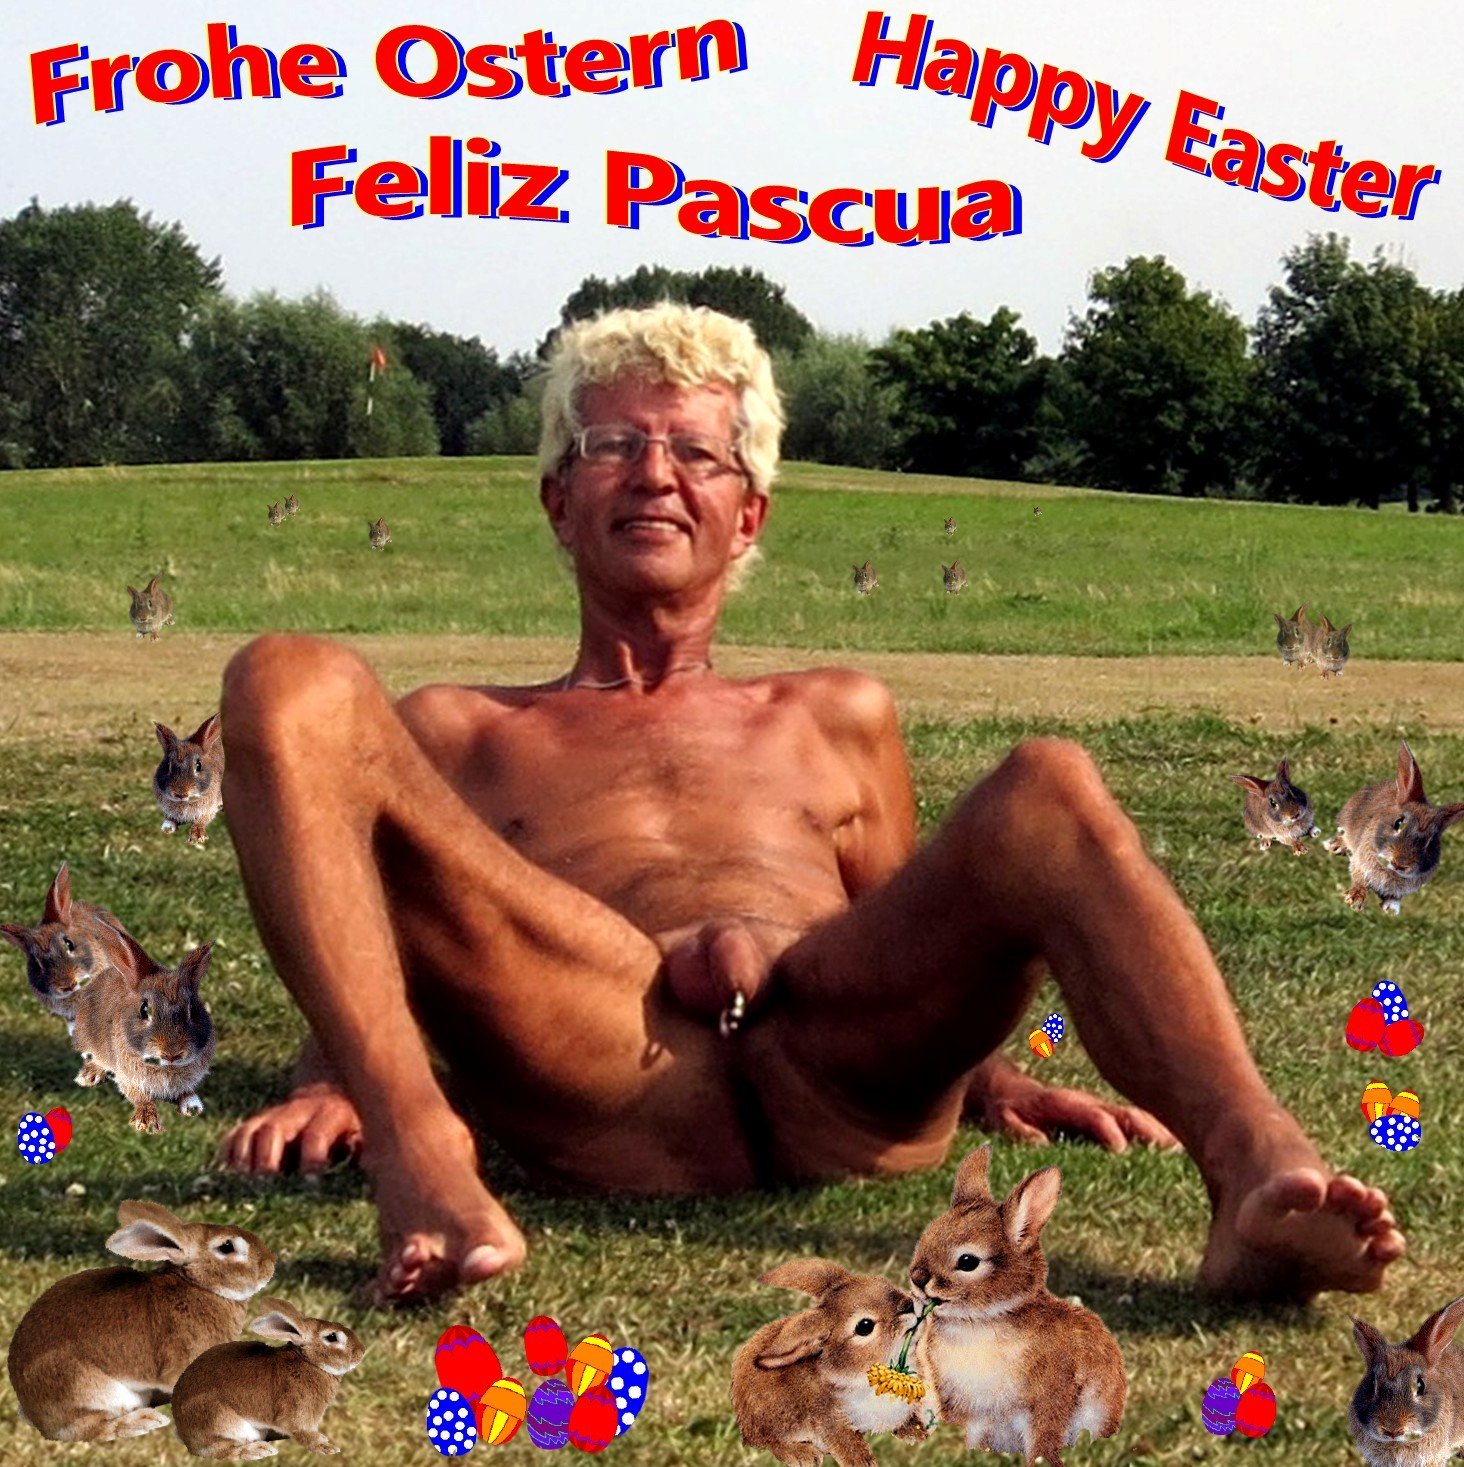 Photo by Norbert with the username @Norbert, who is a verified user,  April 17, 2019 at 11:47 AM and the text says 'Frohe Ostern - Happy Easter - Feliz Pascua'